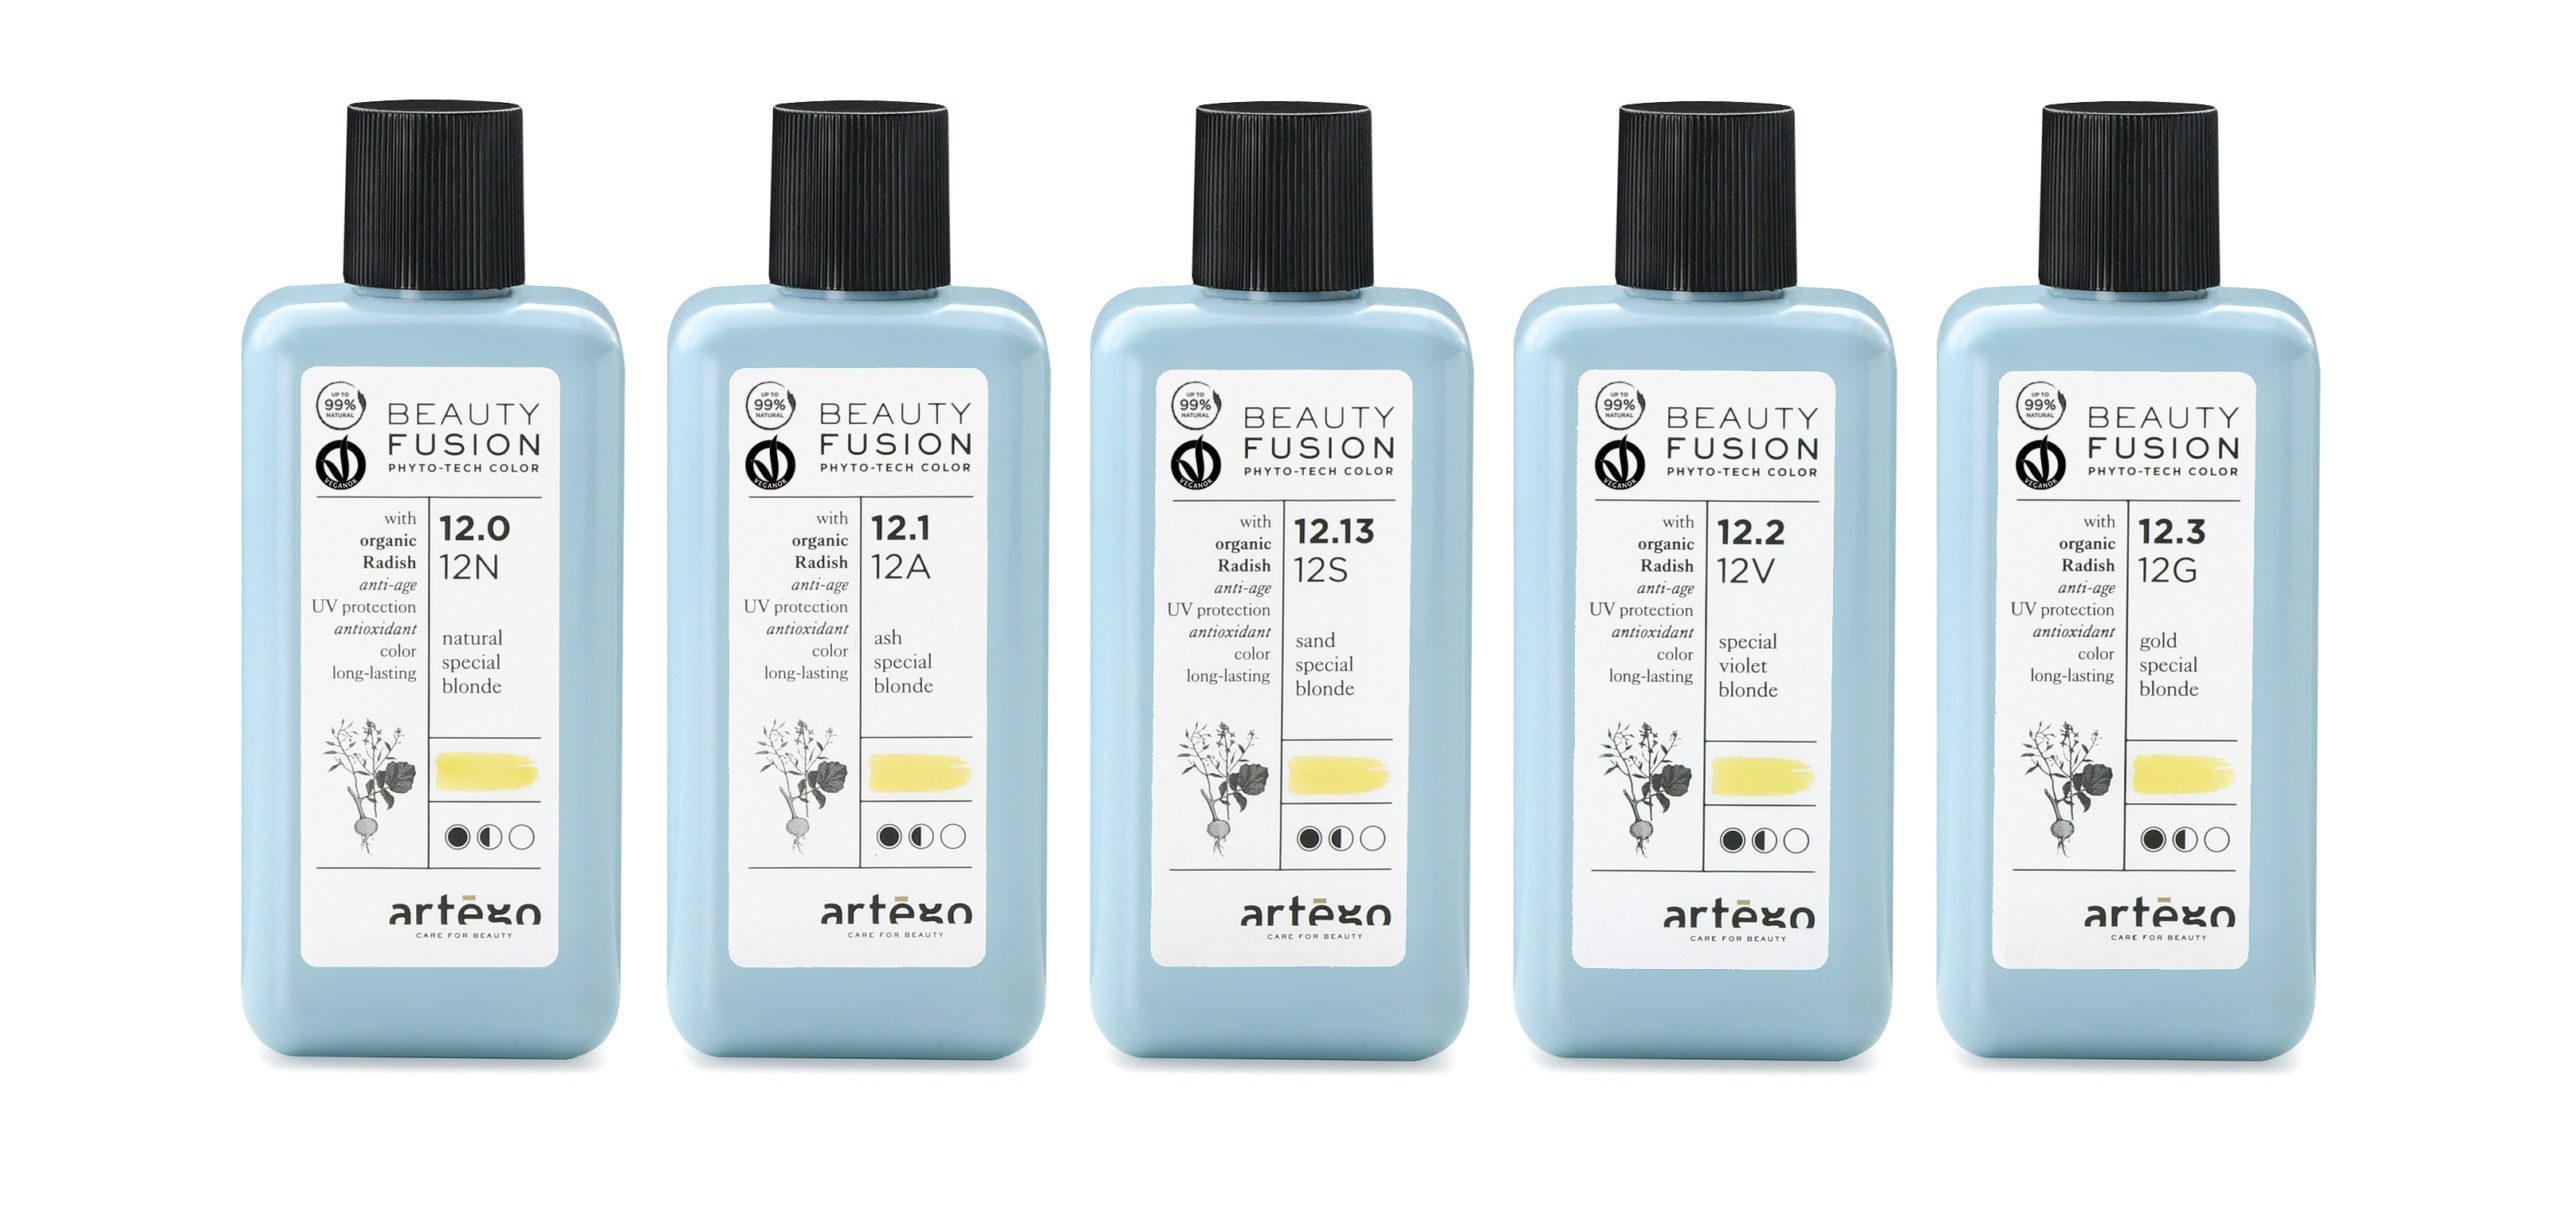 Artego Beauty Fusion Phyto-Tech Color Blonde bottles lined up in a row